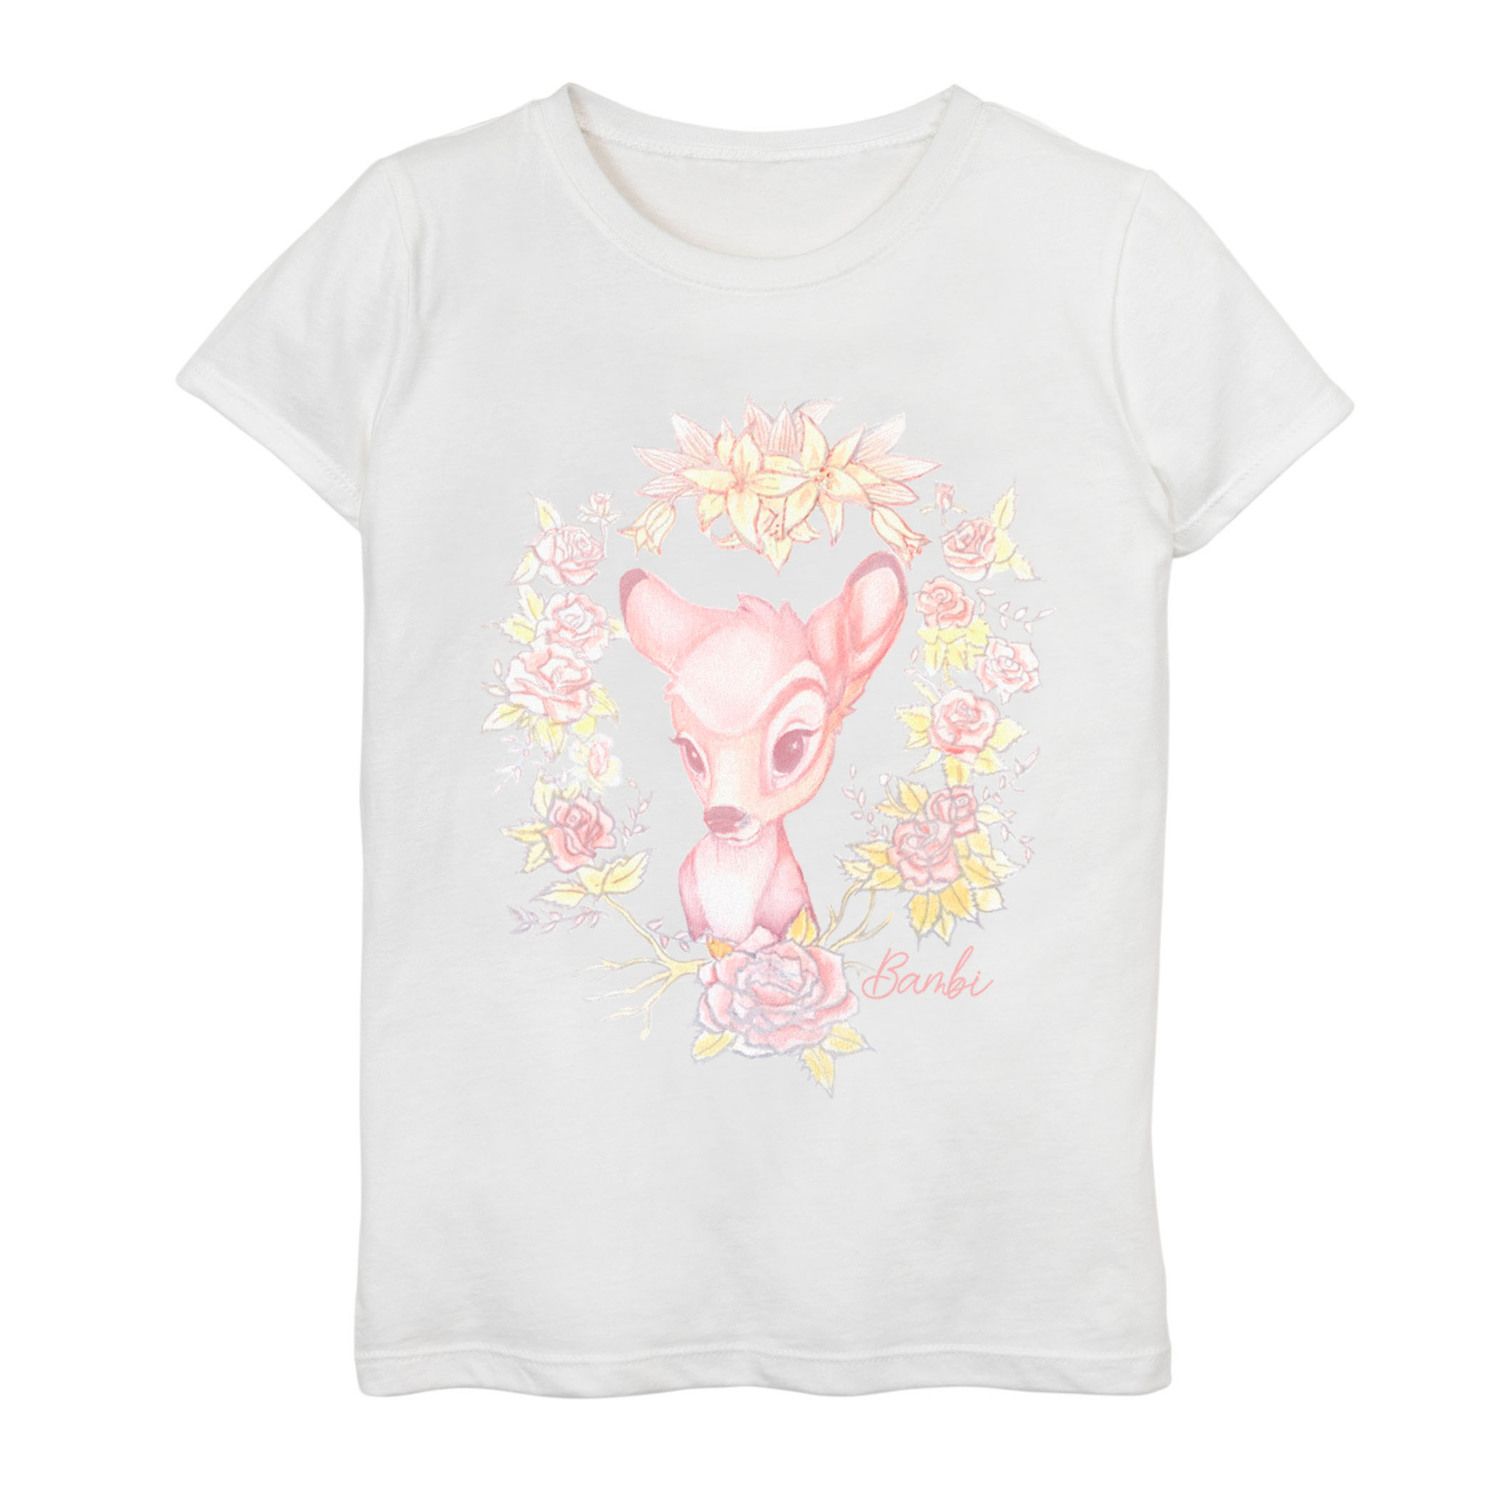 Image for Disney 's Bambi Girls 7-16 Easter Floral Watercolor Portrait Graphic Tee at Kohl's.